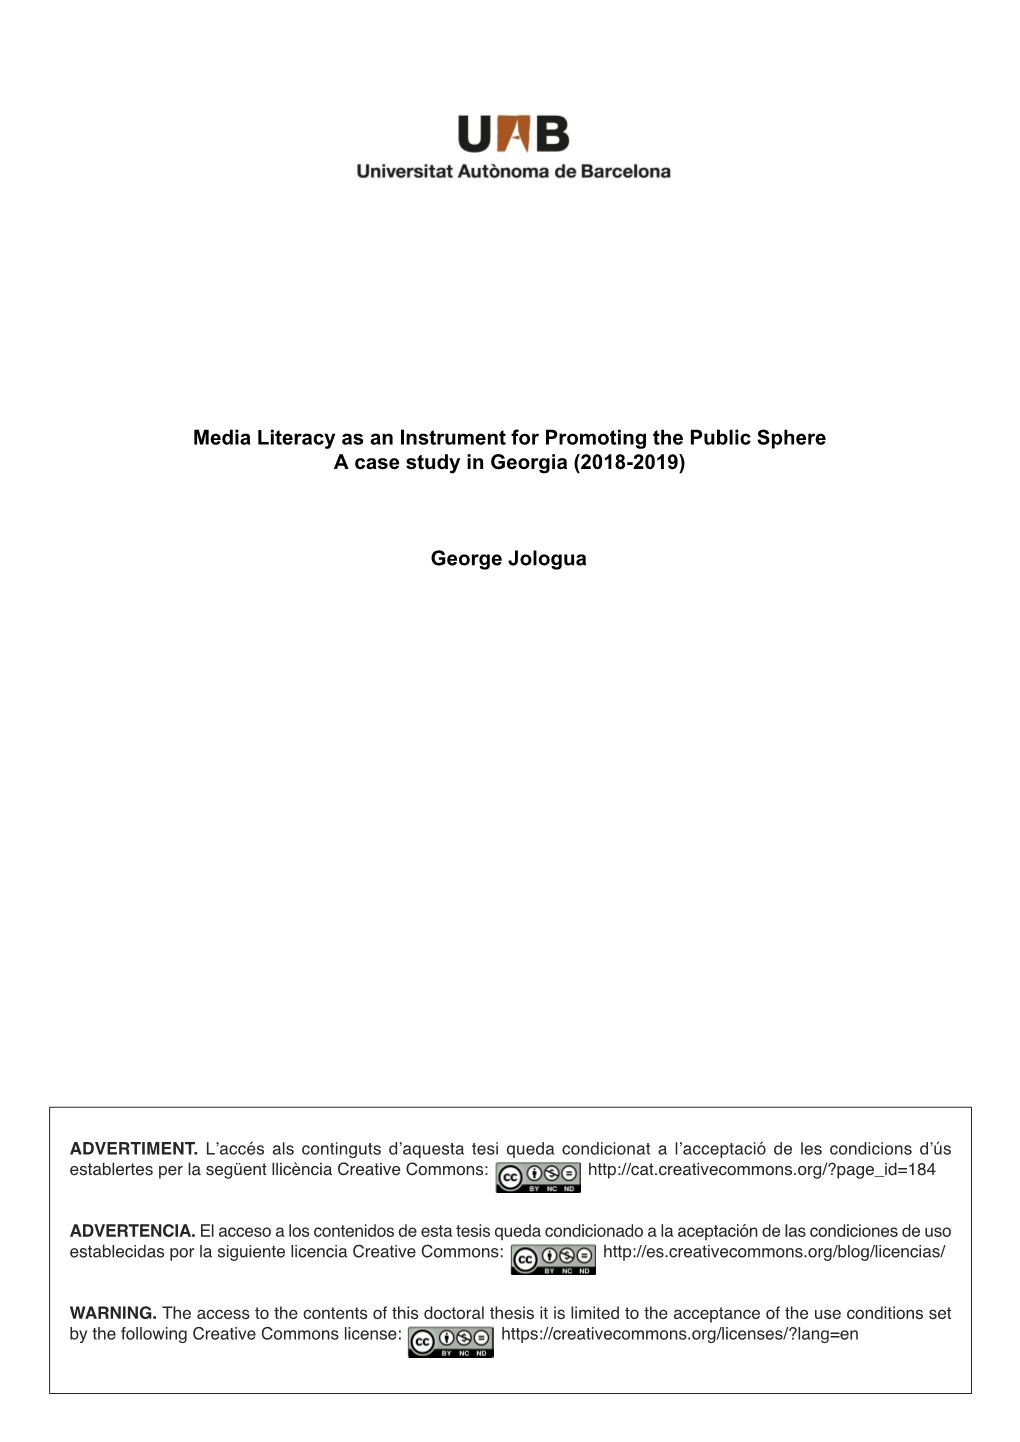 Media Literacy As an Instrument for Promoting the Public Sphere A